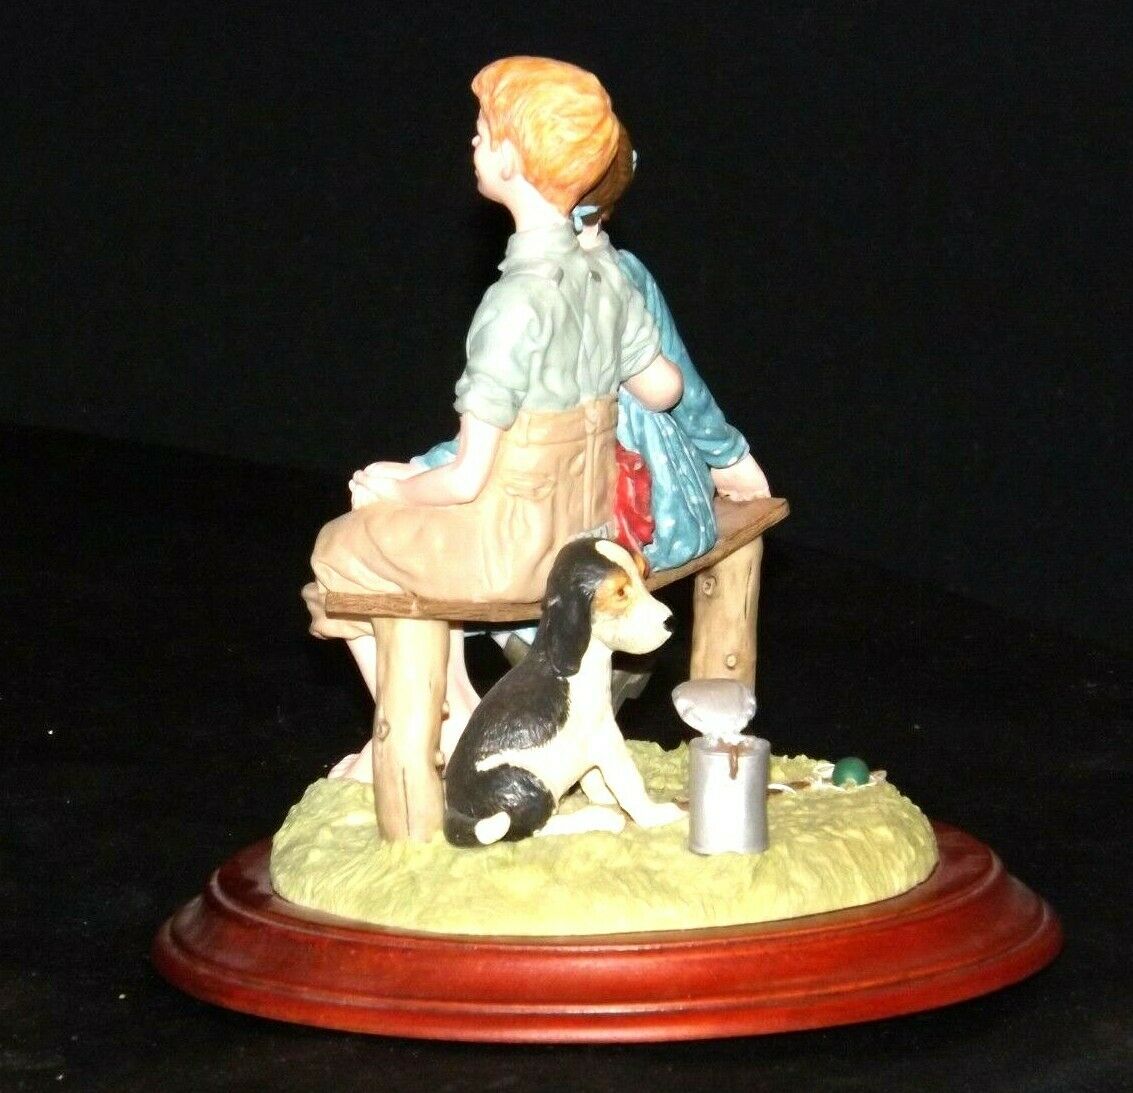 Figurine Statue Bisque Porcelain Hand Painted Little Boy Fishing Puppy  Watching Dad With Book on His Chest Holding a Pipe. Norman Rockwell 